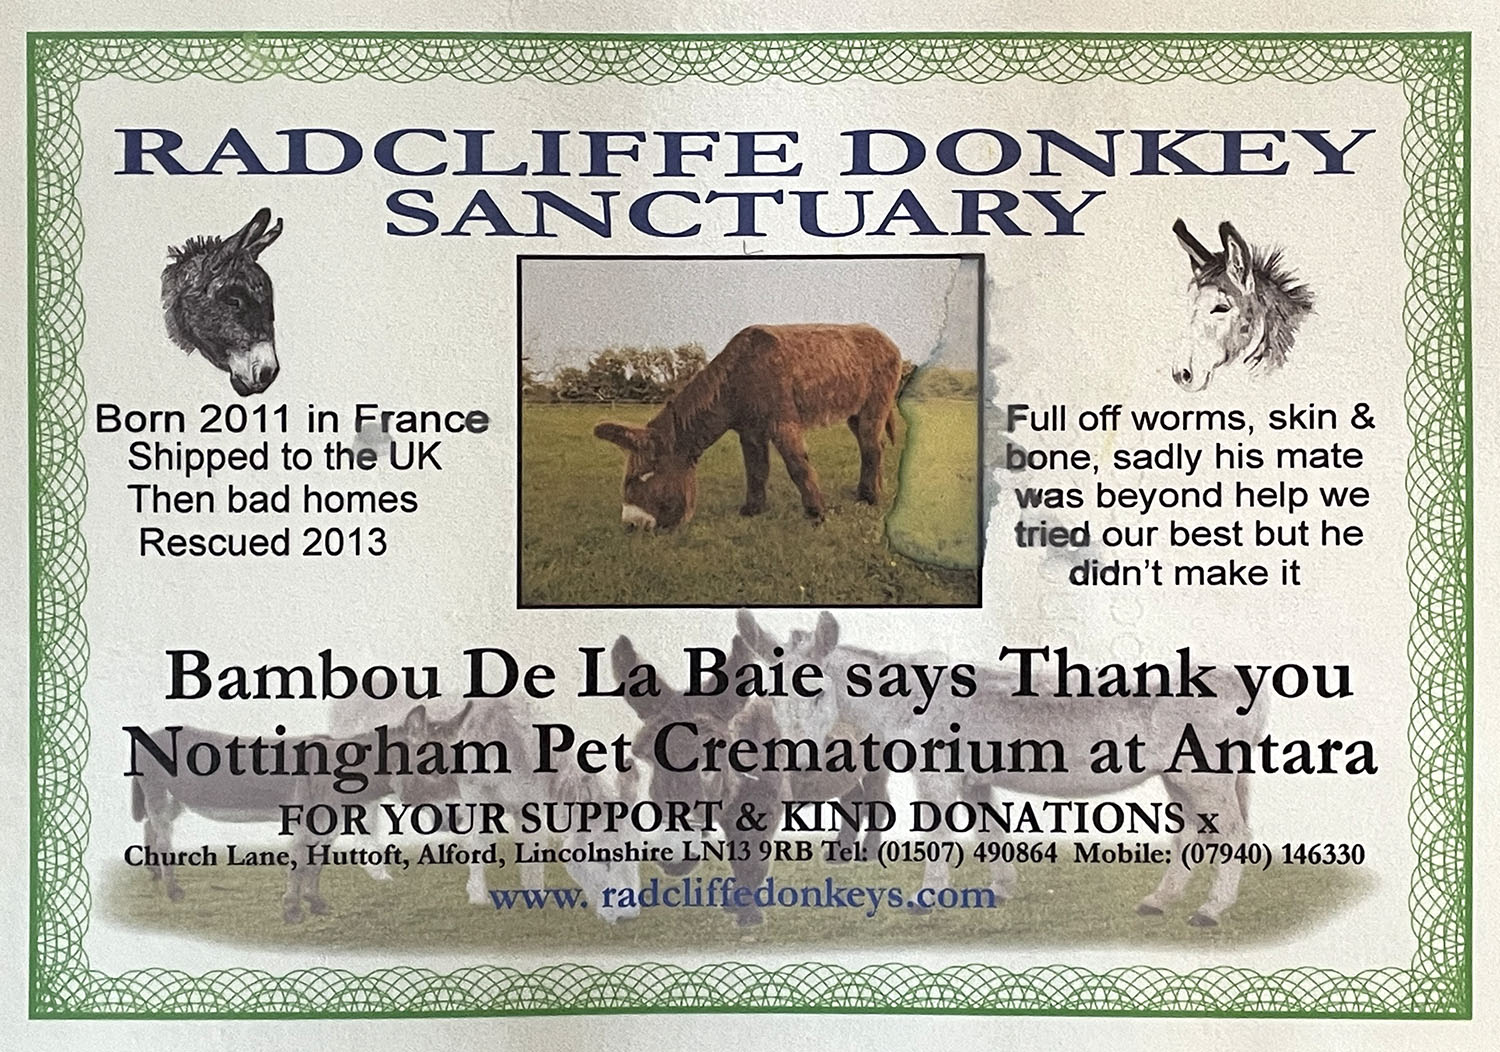 Supporting Radcliffe Donkey Sanctuary